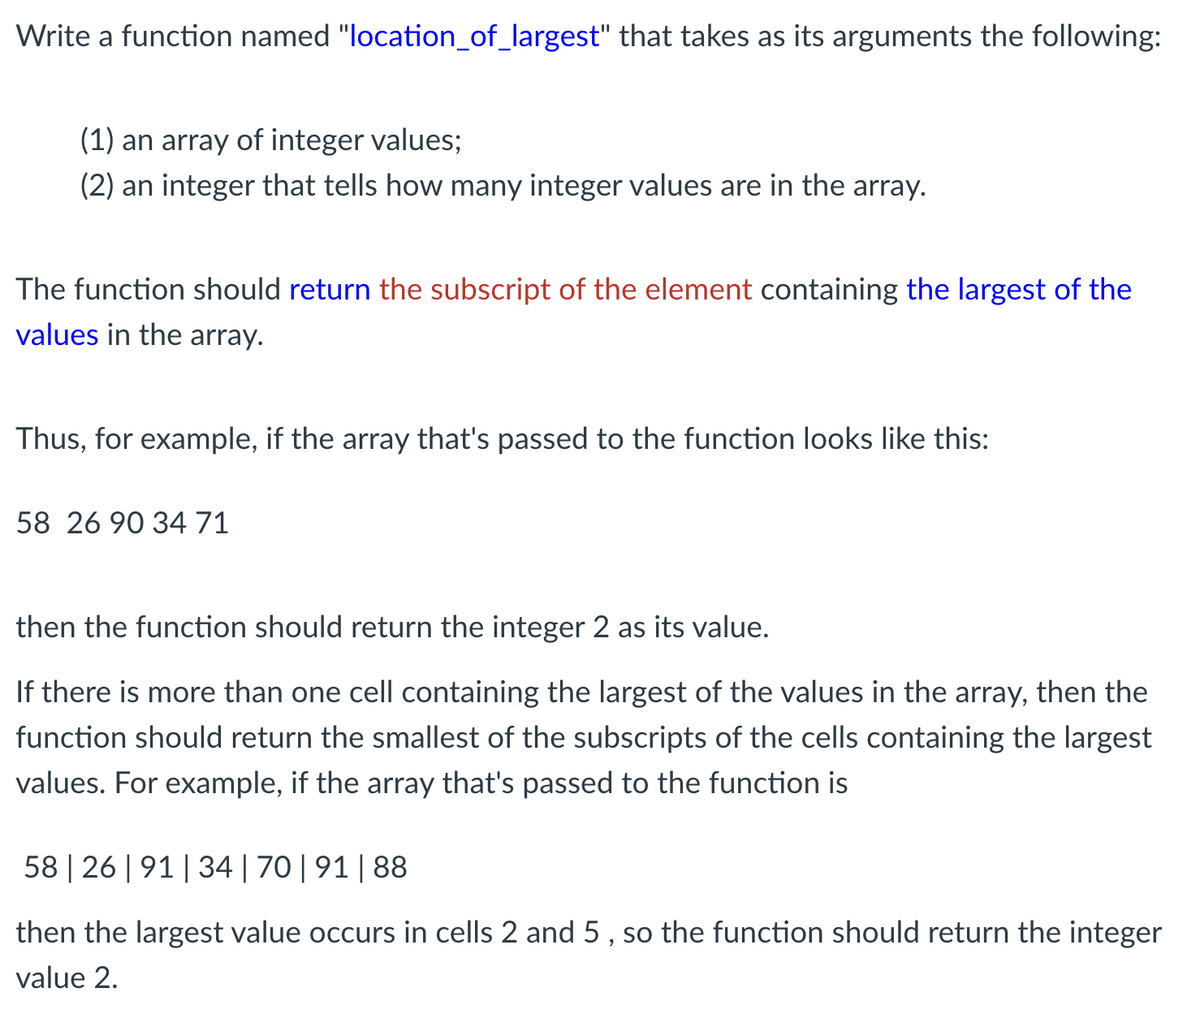 Write a function named "location_of_largest" that takes as its arguments the following:
(1) an array of integer values;
(2) an integer that tells how many integer values are in the array.
The function should return the subscript of the element containing the largest of the
values in the array.
Thus, for example, if the array that's passed to the function looks like this:
58 26 90 3471
then the function should return the integer 2 as its value.
If there is more than one cell containing the largest of the values in the array, then the
function should return the smallest of the subscripts of the cells containing the largest
values. For example, if the array that's passed to the function is
58 | 26 | 91| 34| 70|91| 88
then the largest value occurs in cells 2 and 5 , so the function should return the integer
value 2.
